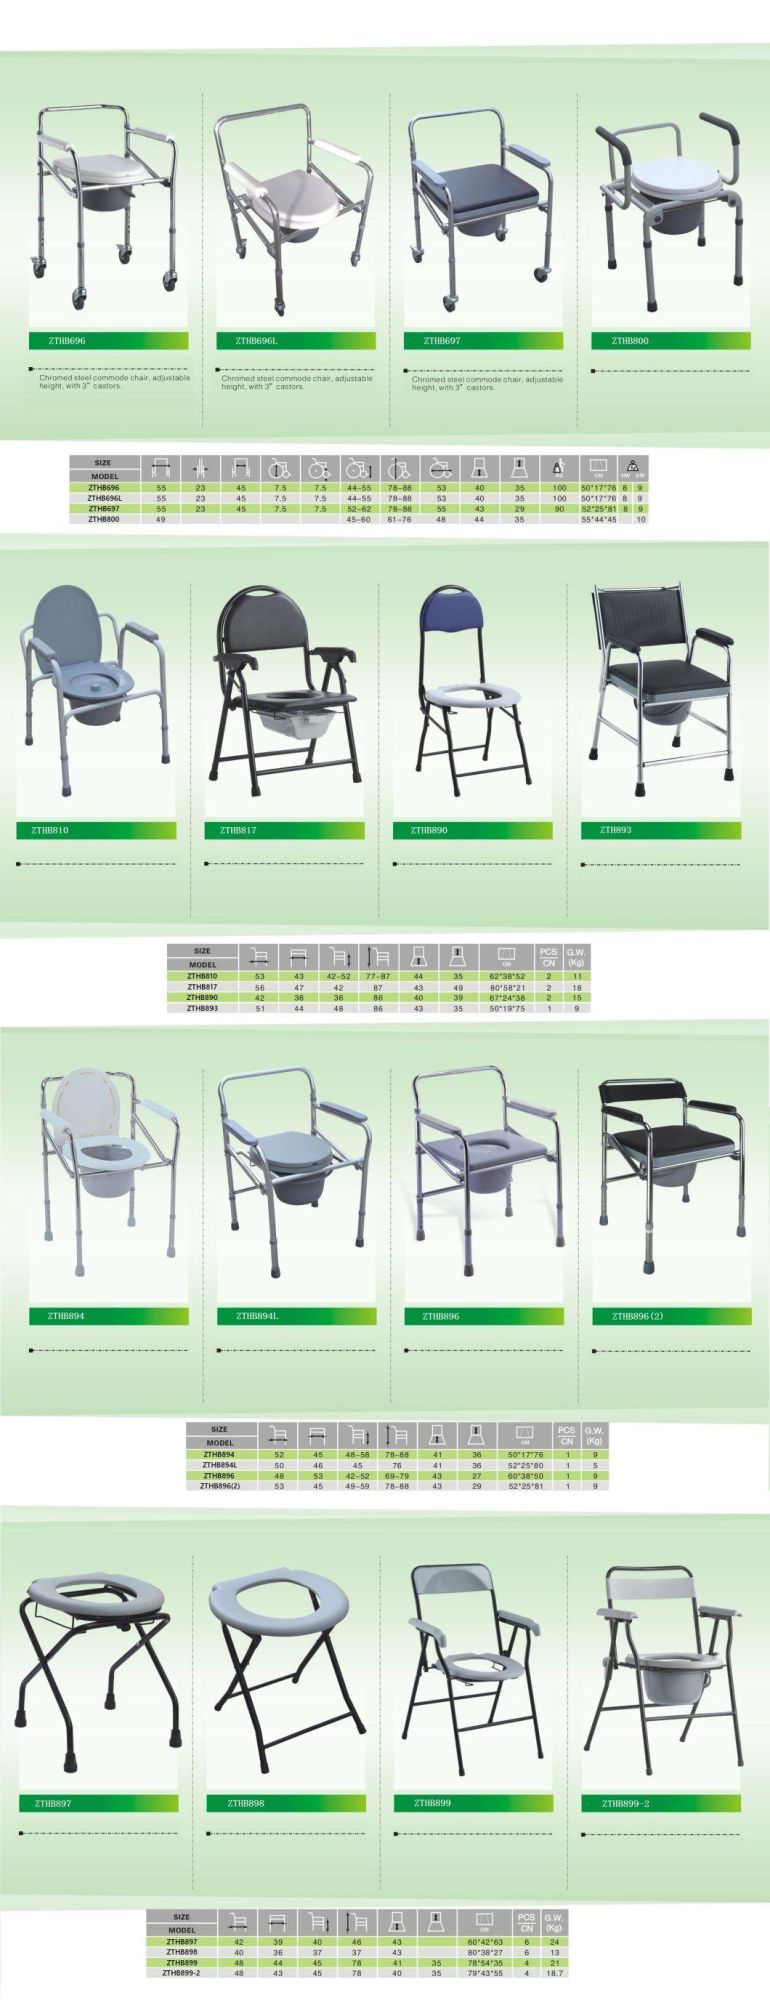 Pregnant Woman Home Care Antiskid Folding Lightweight Commode Toilet Chair Elderly/Disable Patient People Rehabilitation Products Steel Nursing Safety Seat